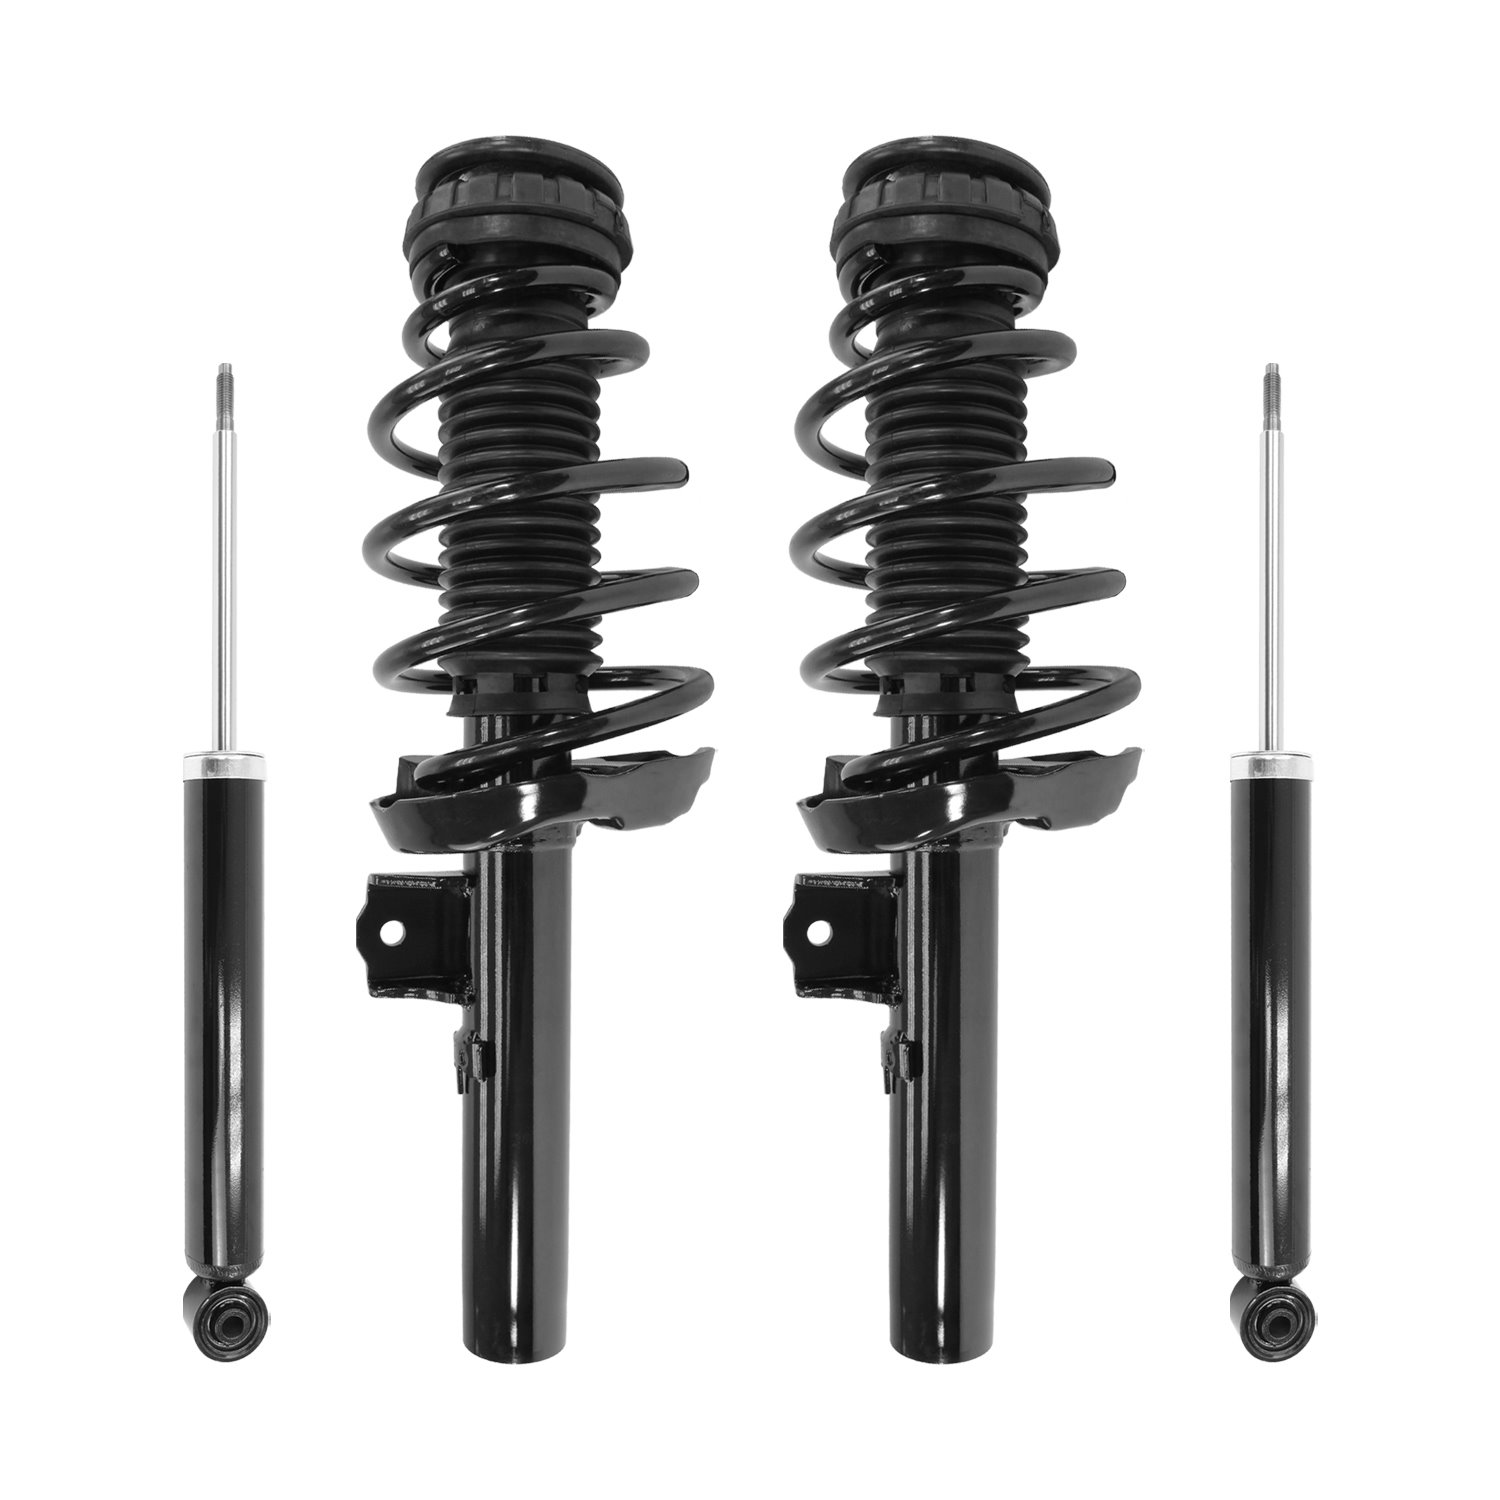 4-13490-251360-001 Front & Rear Complete Strut Assembly Shock Absorber Kit Fits Select Cadillac XTS